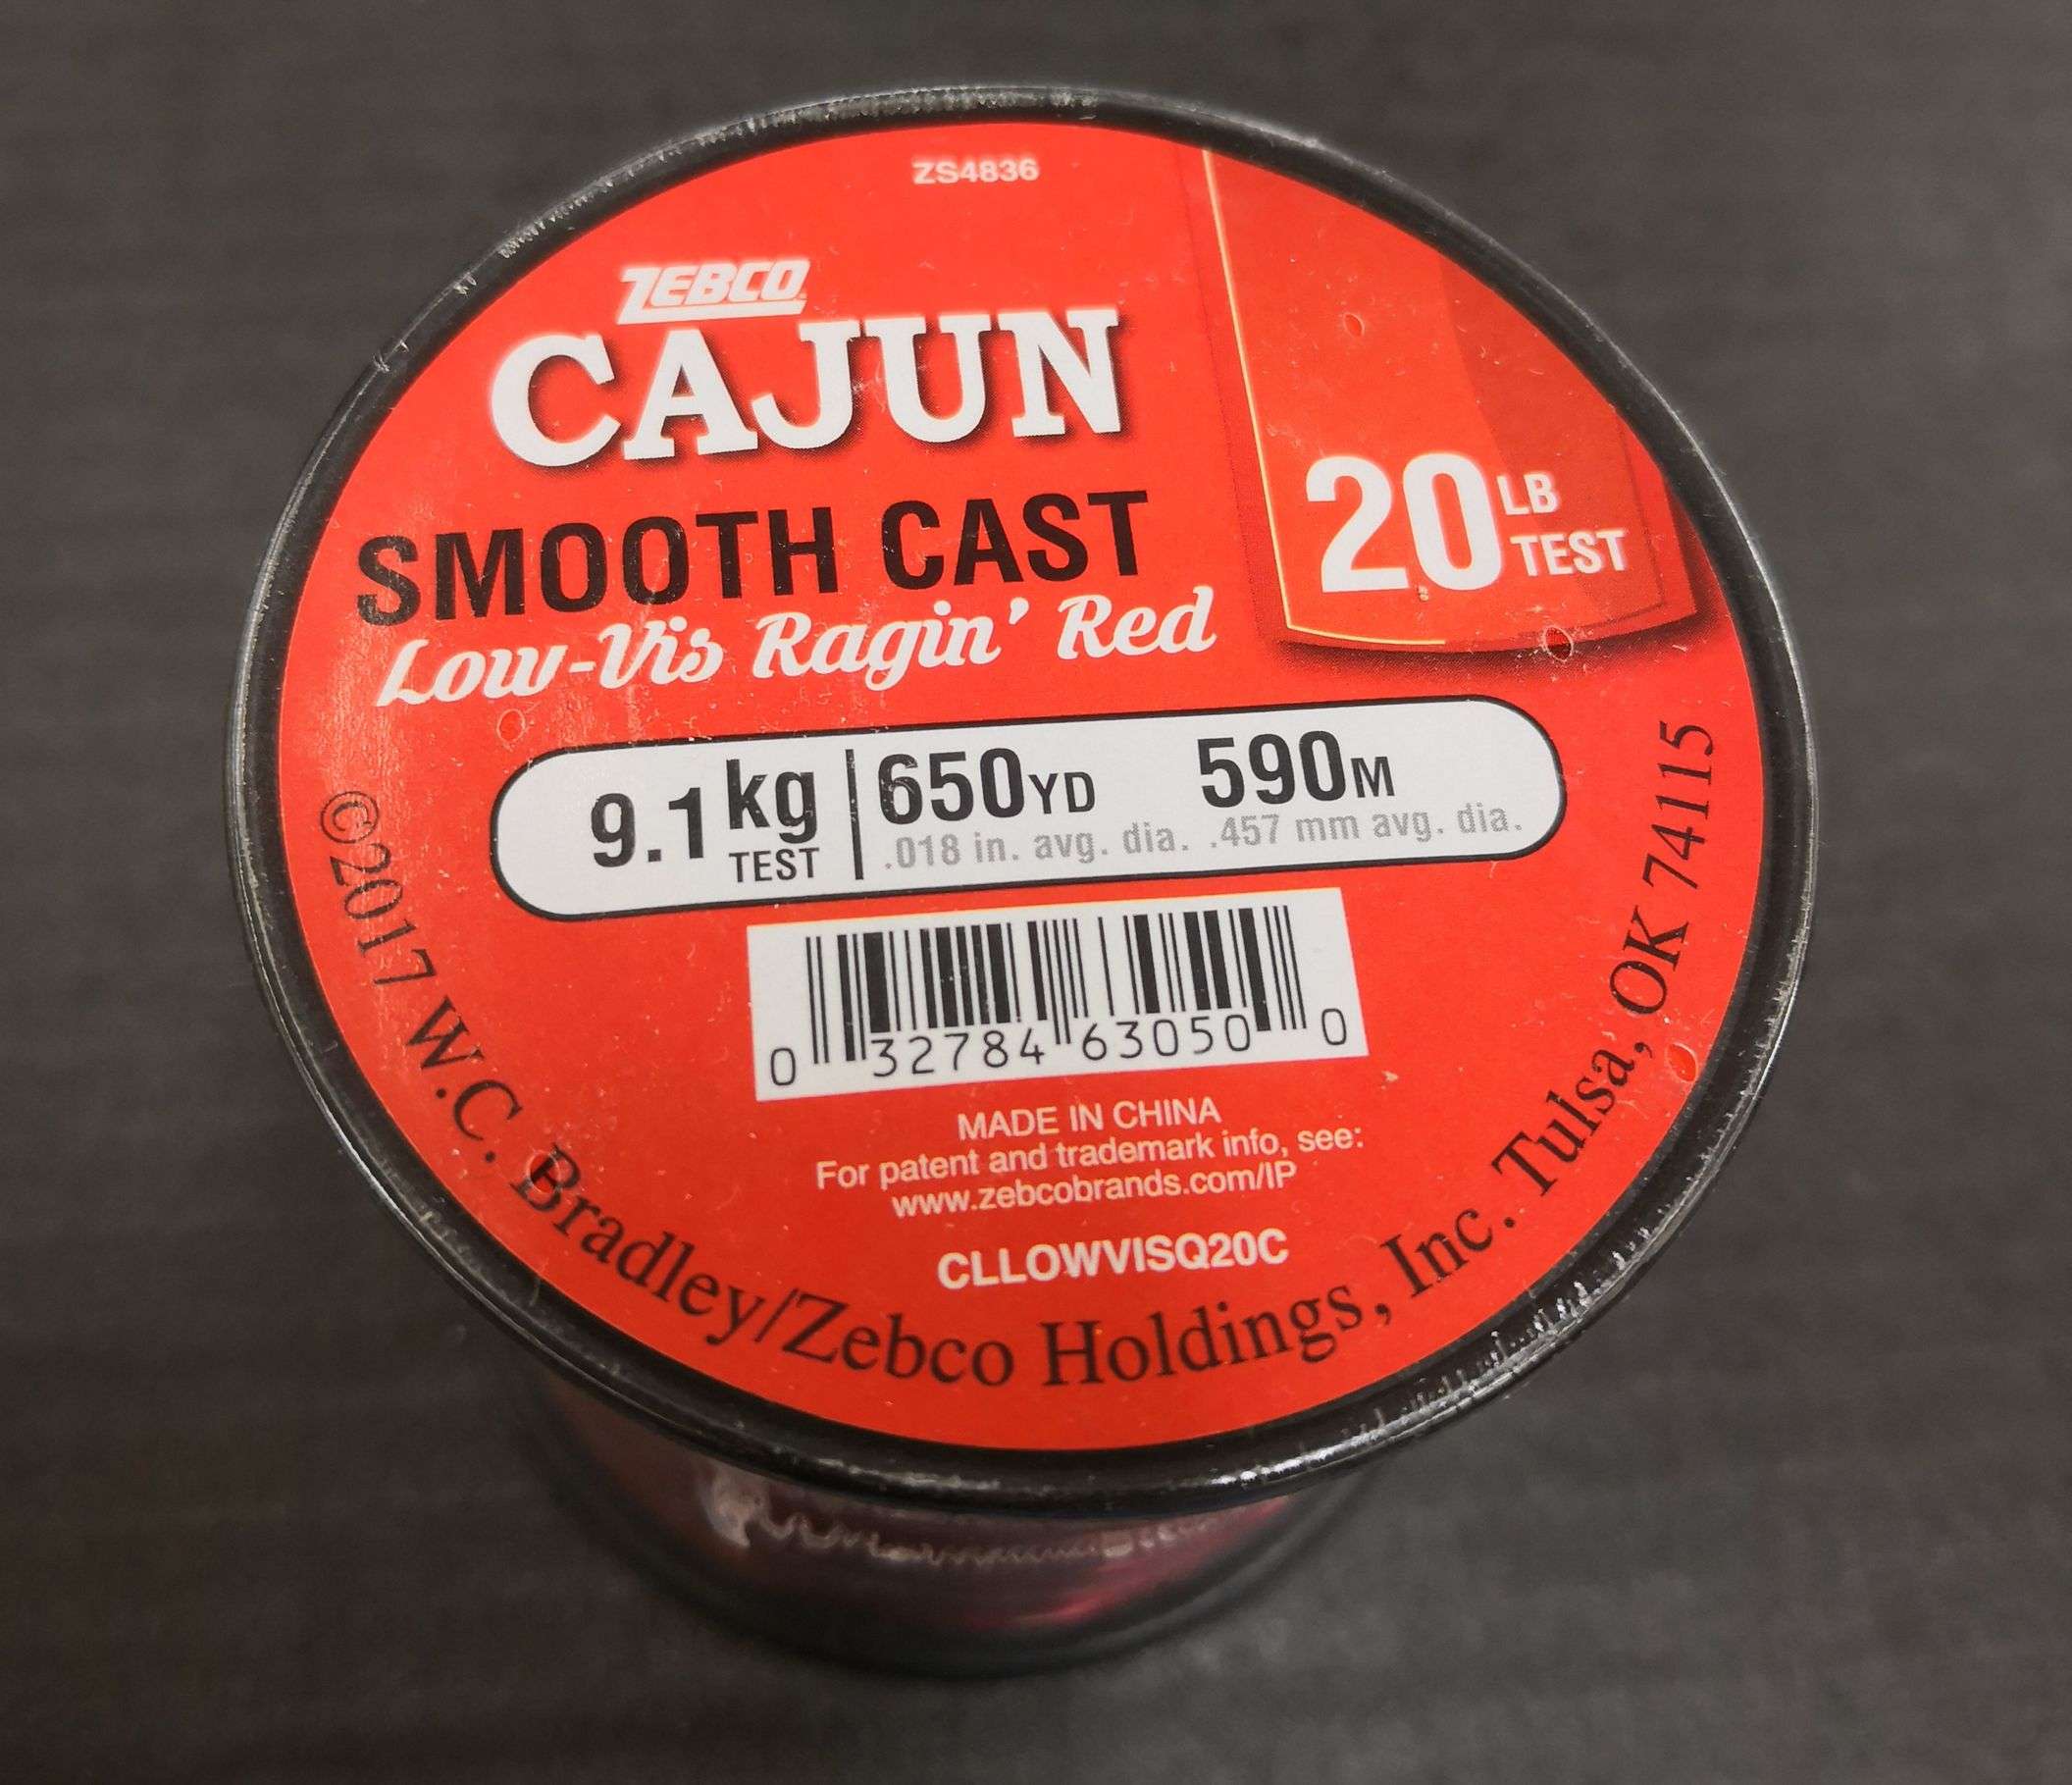 Zebco Cajun Line Smooth Cast Fishing Line, Low Vis Ragin' Red, 20-Pound  Tested 